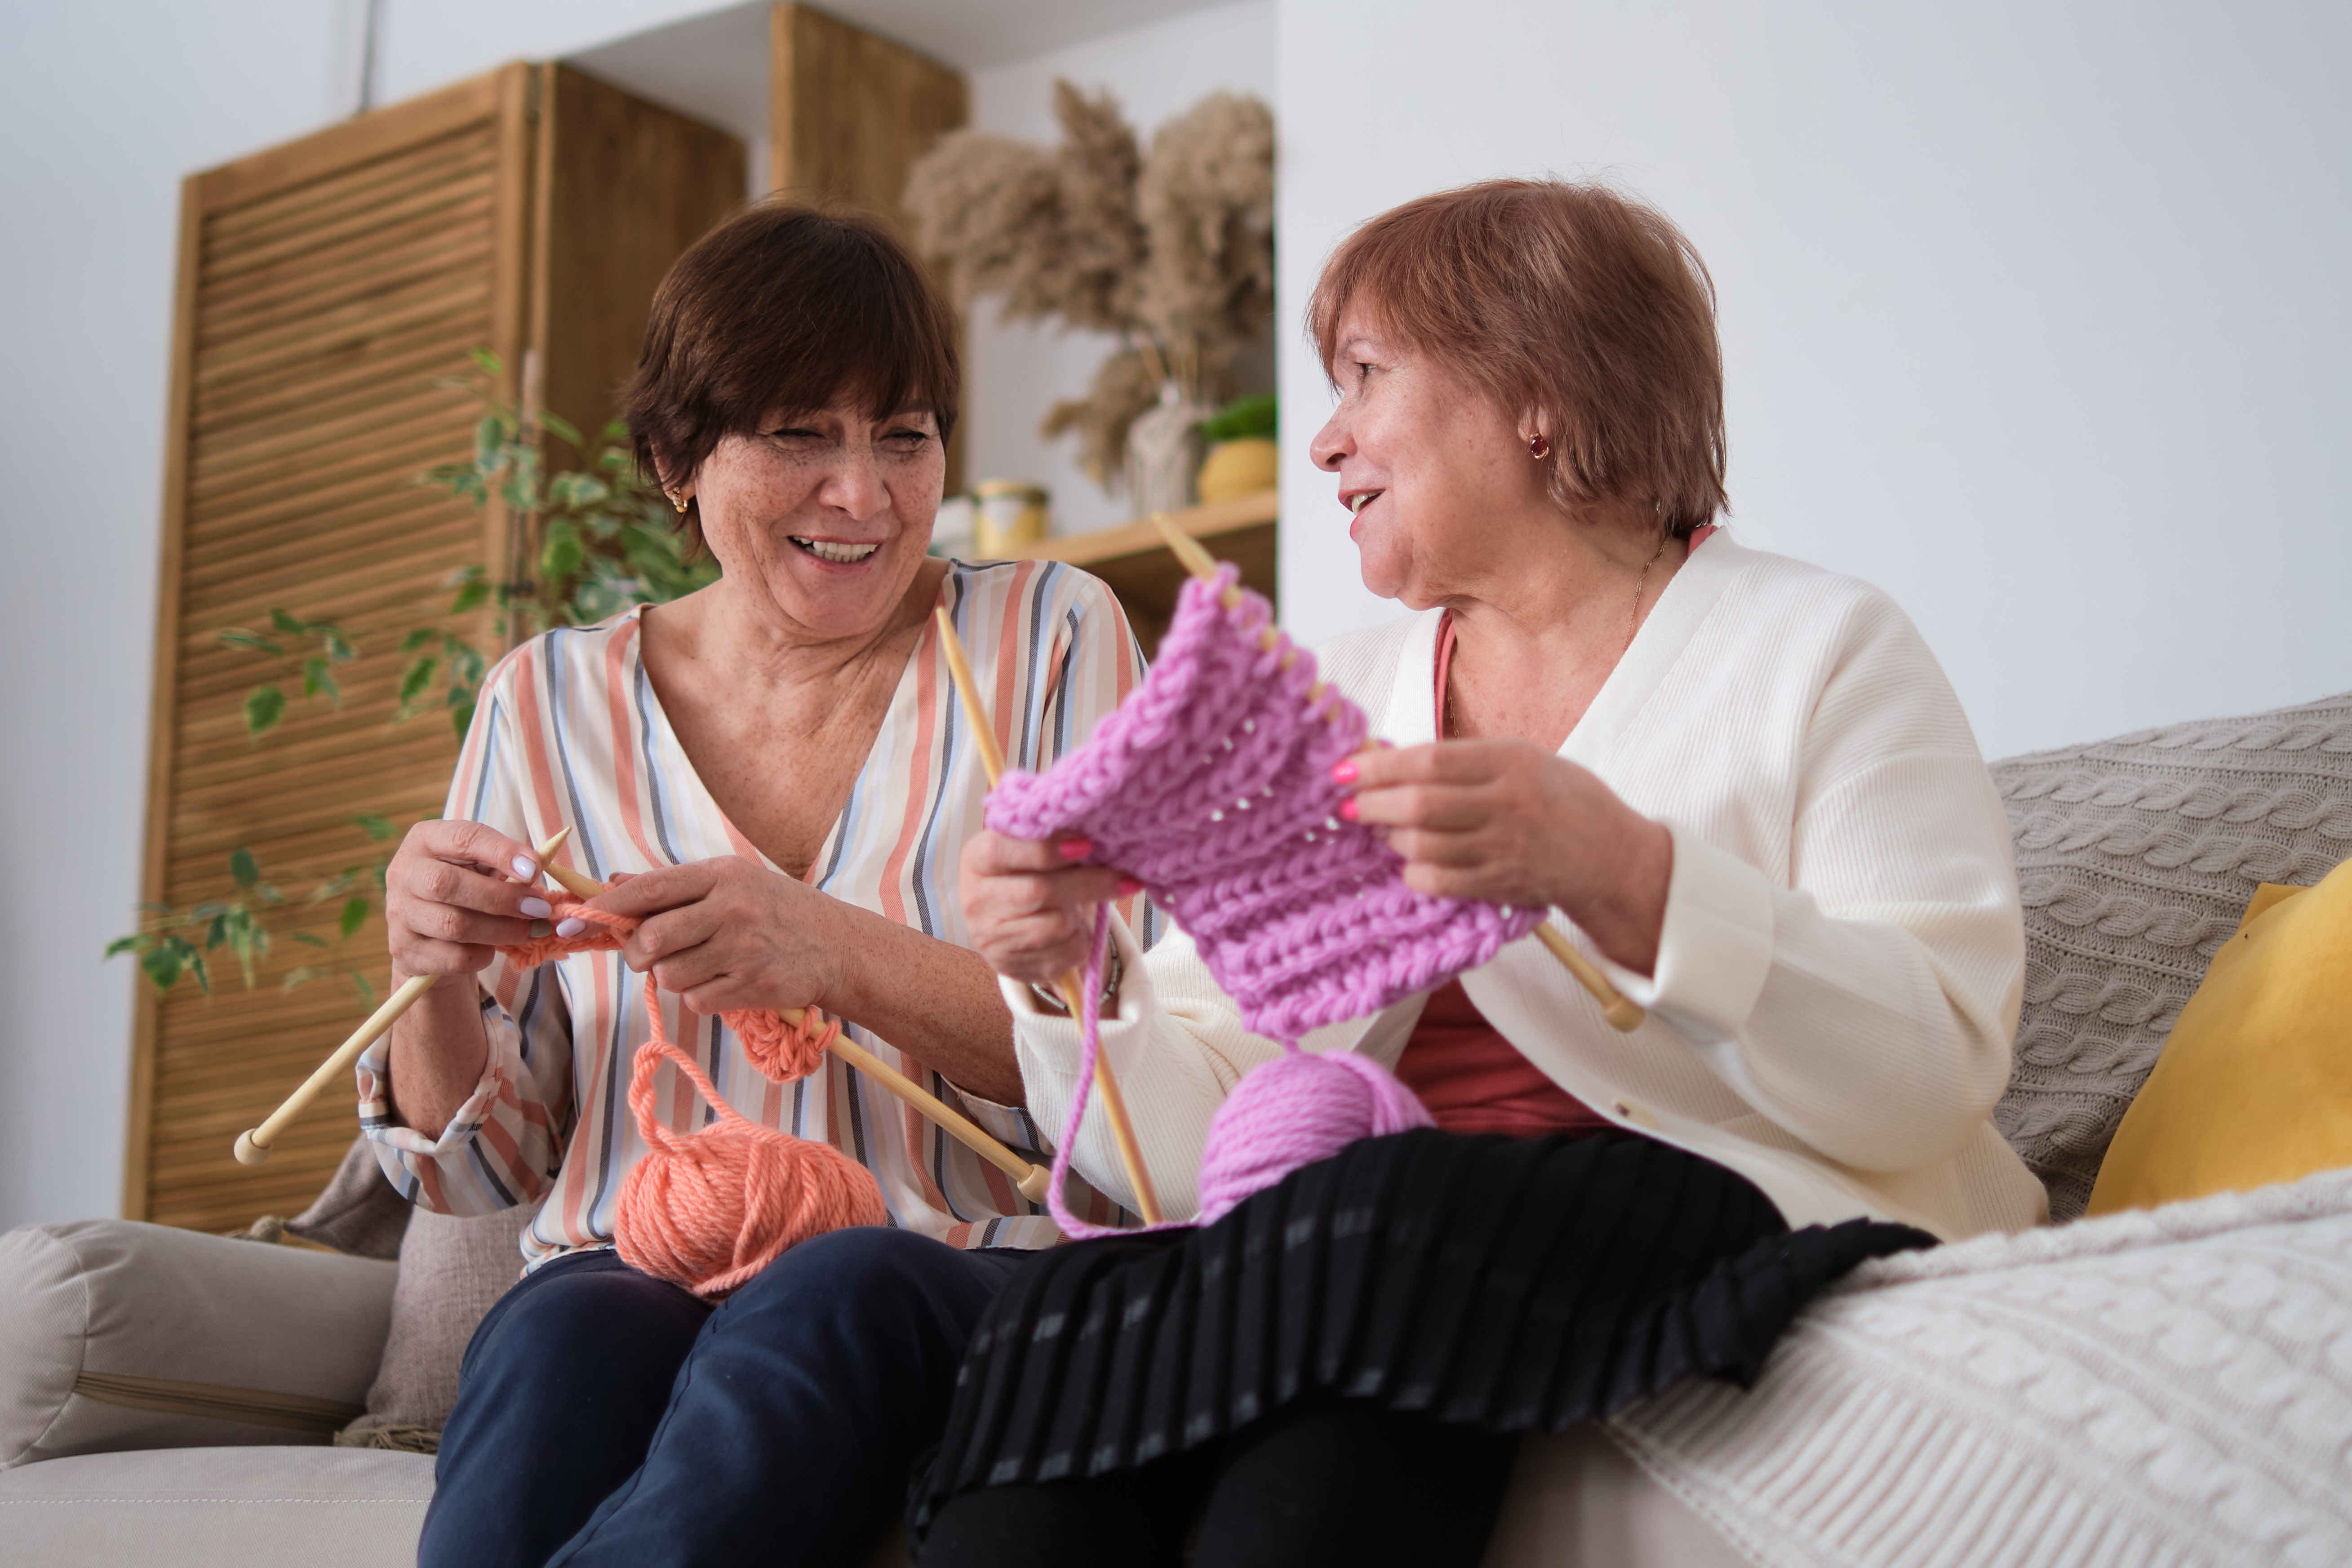 Engaged in heartfelt chatter and the soothing rhythm of knitting. Art of Knitting: Knitting serves